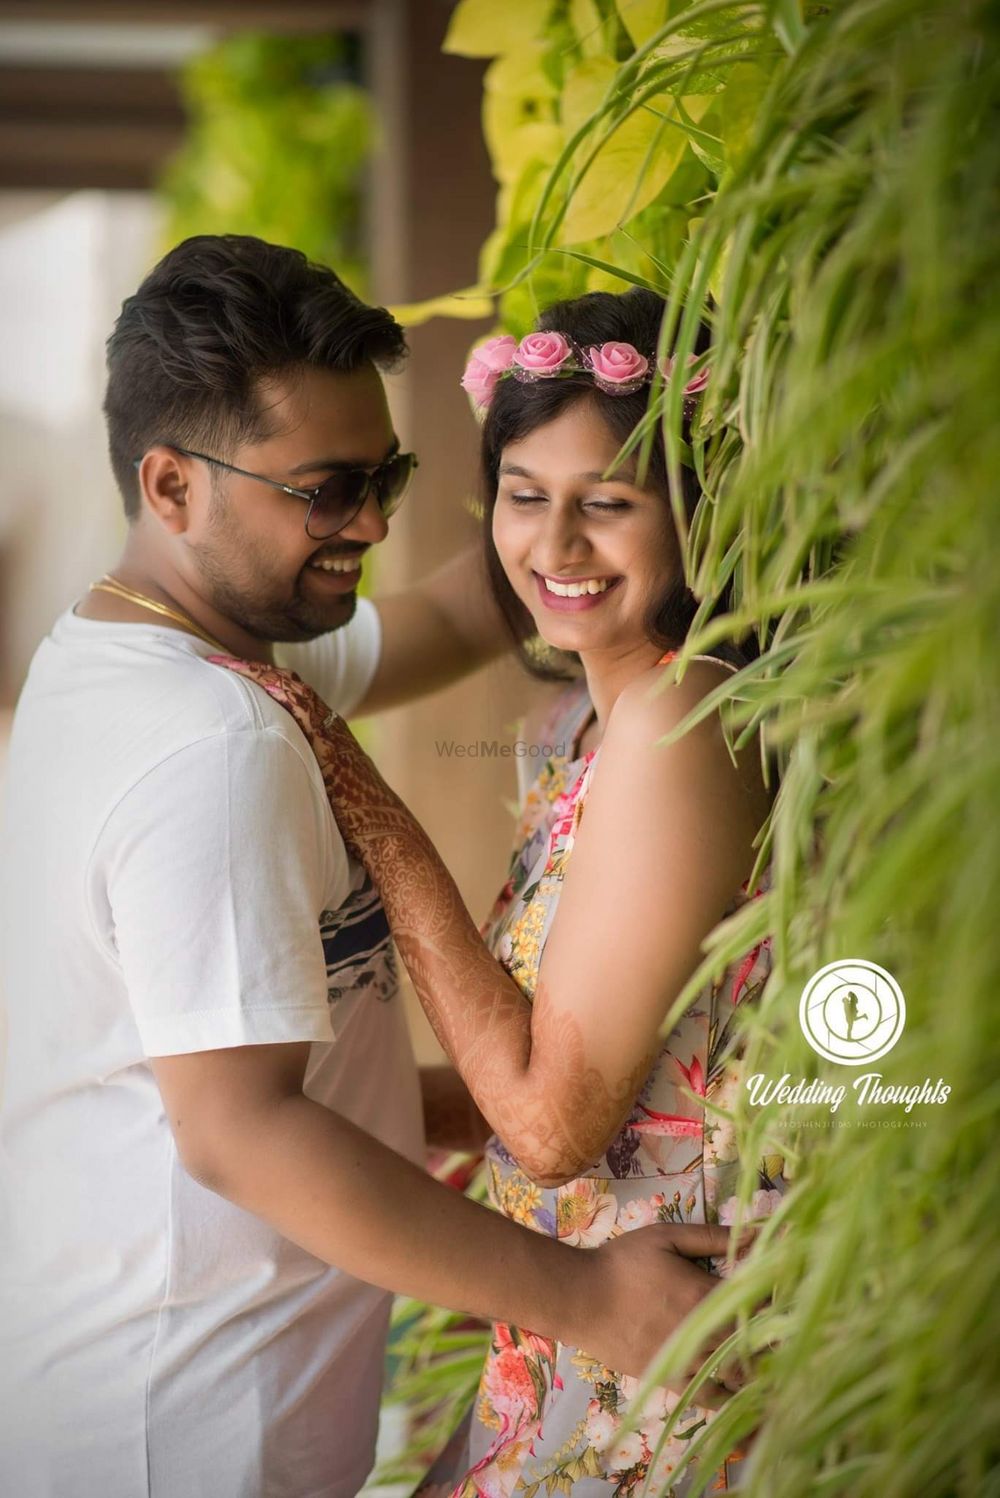 Photo From harsh and kirtis pre wedding moments - By Wedding Thoughts Proshenjit Das Photography